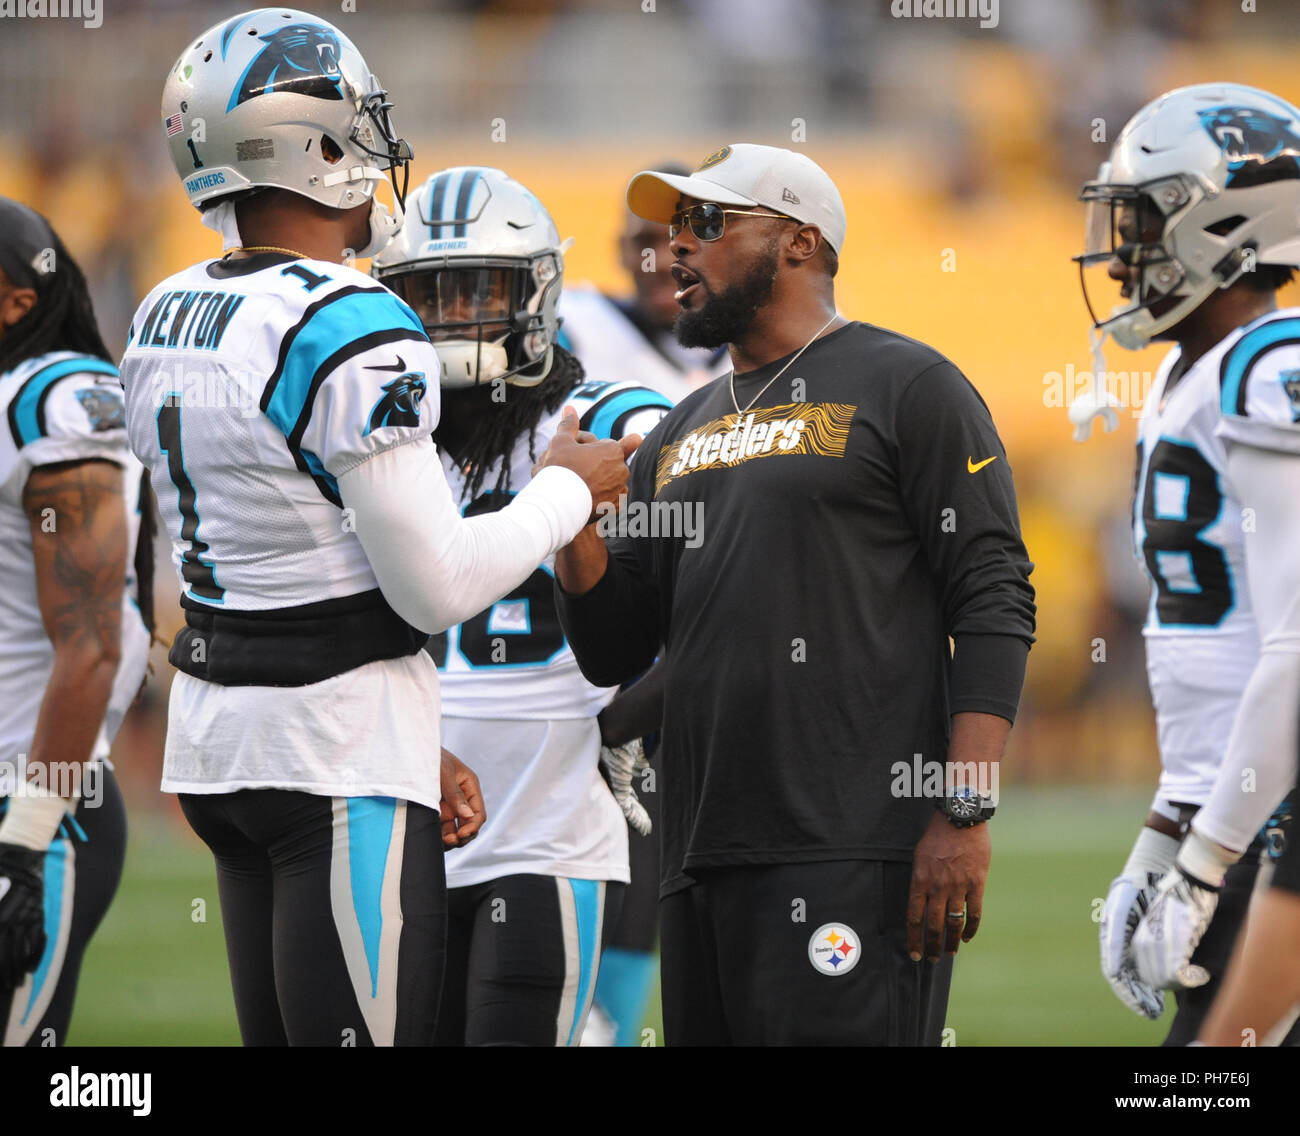 Pittsburgh, USA. 30th Aug 2018. August 30th, 2018: Panthers #1 Cam Newton,  and Steelers Head Coach Mike Tomlin during the Pittsburgh Steelers vs  Carolina Panthers game at Heinz Field in Pittsburgh, PA.